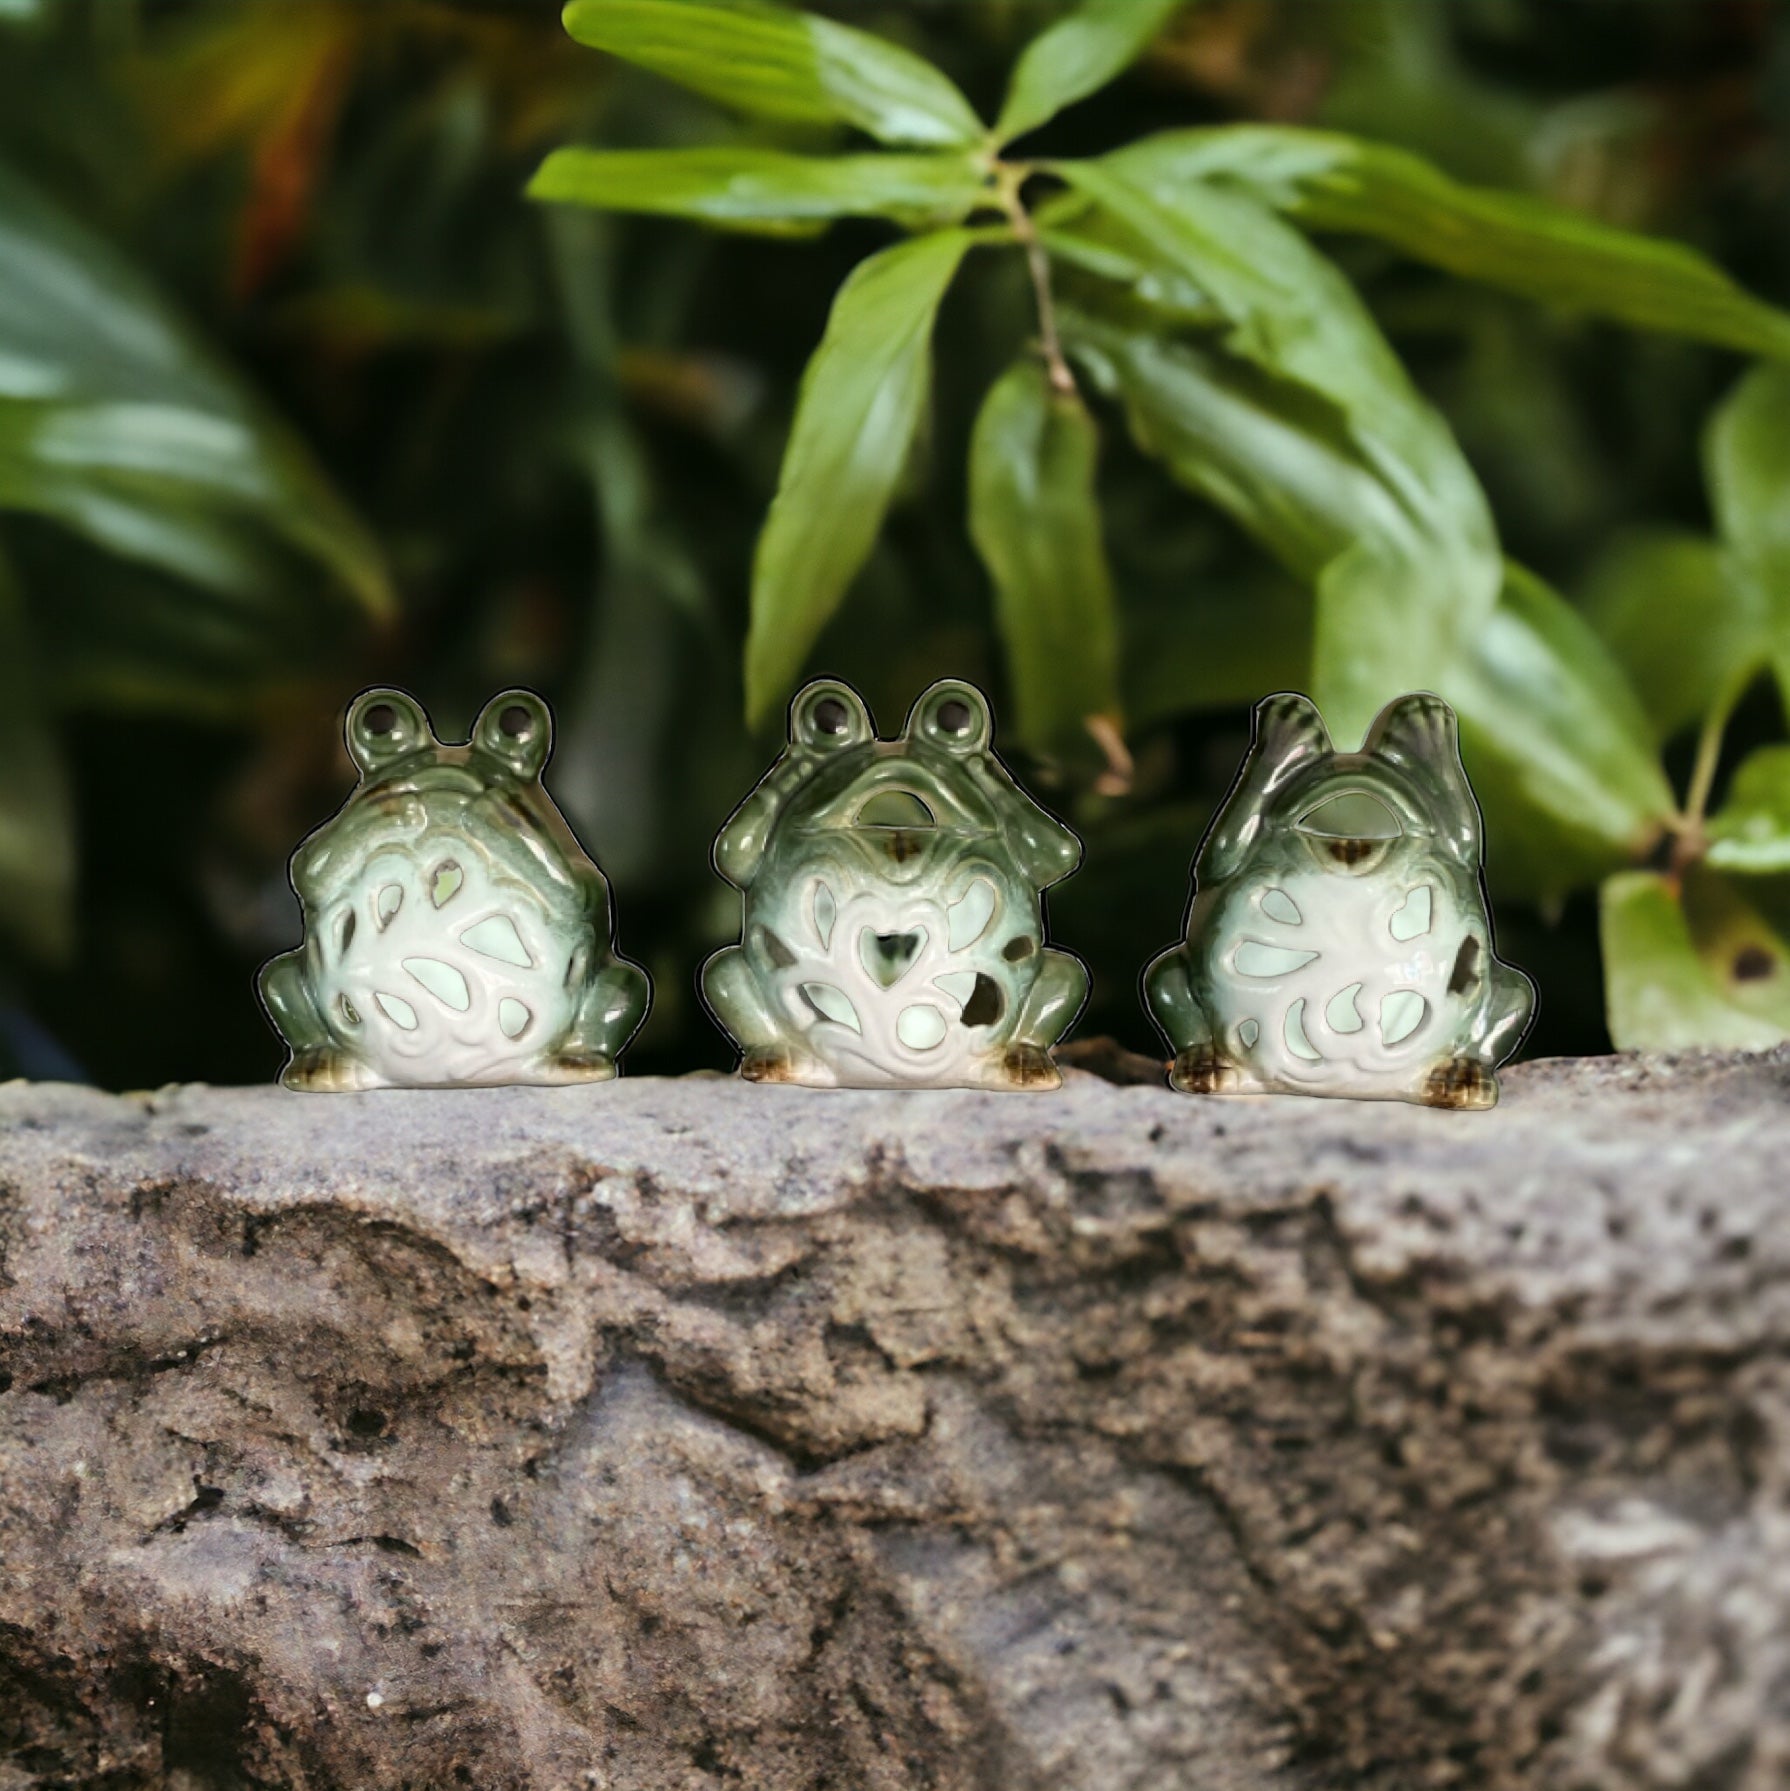 Frog Set of 3 Candle Holder - The Renmy Store Homewares & Gifts 